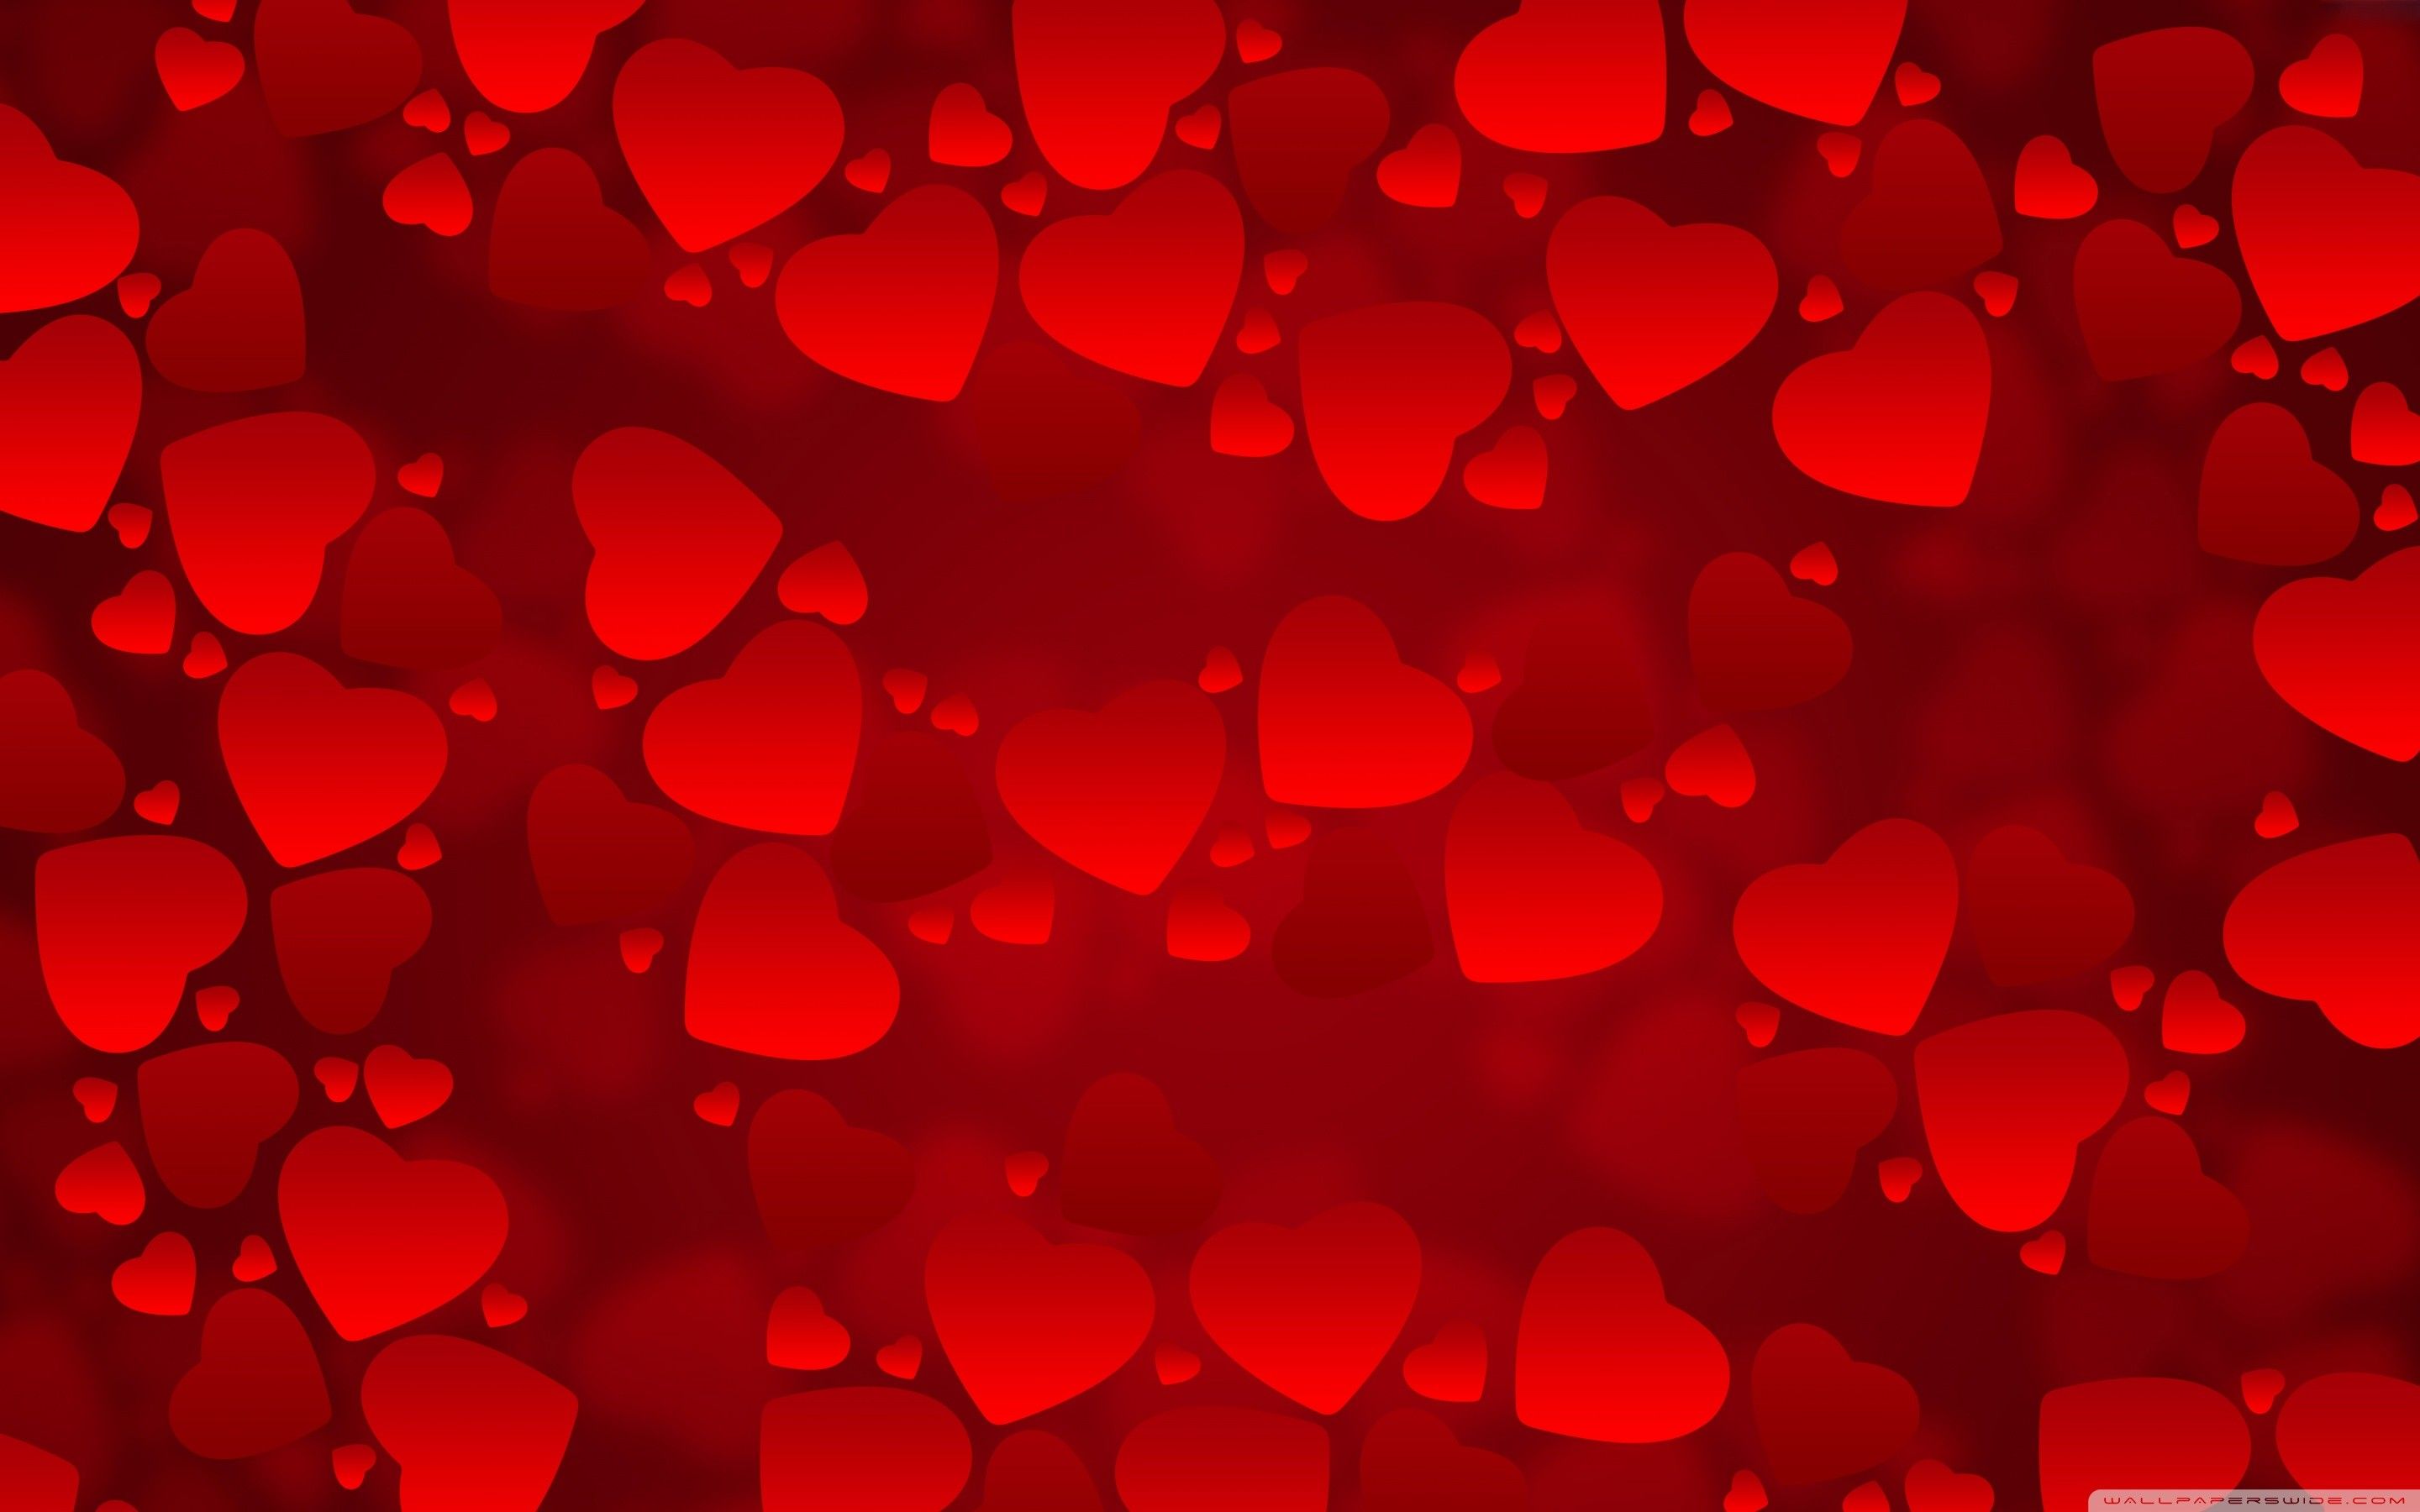 red heart wallpapers free download